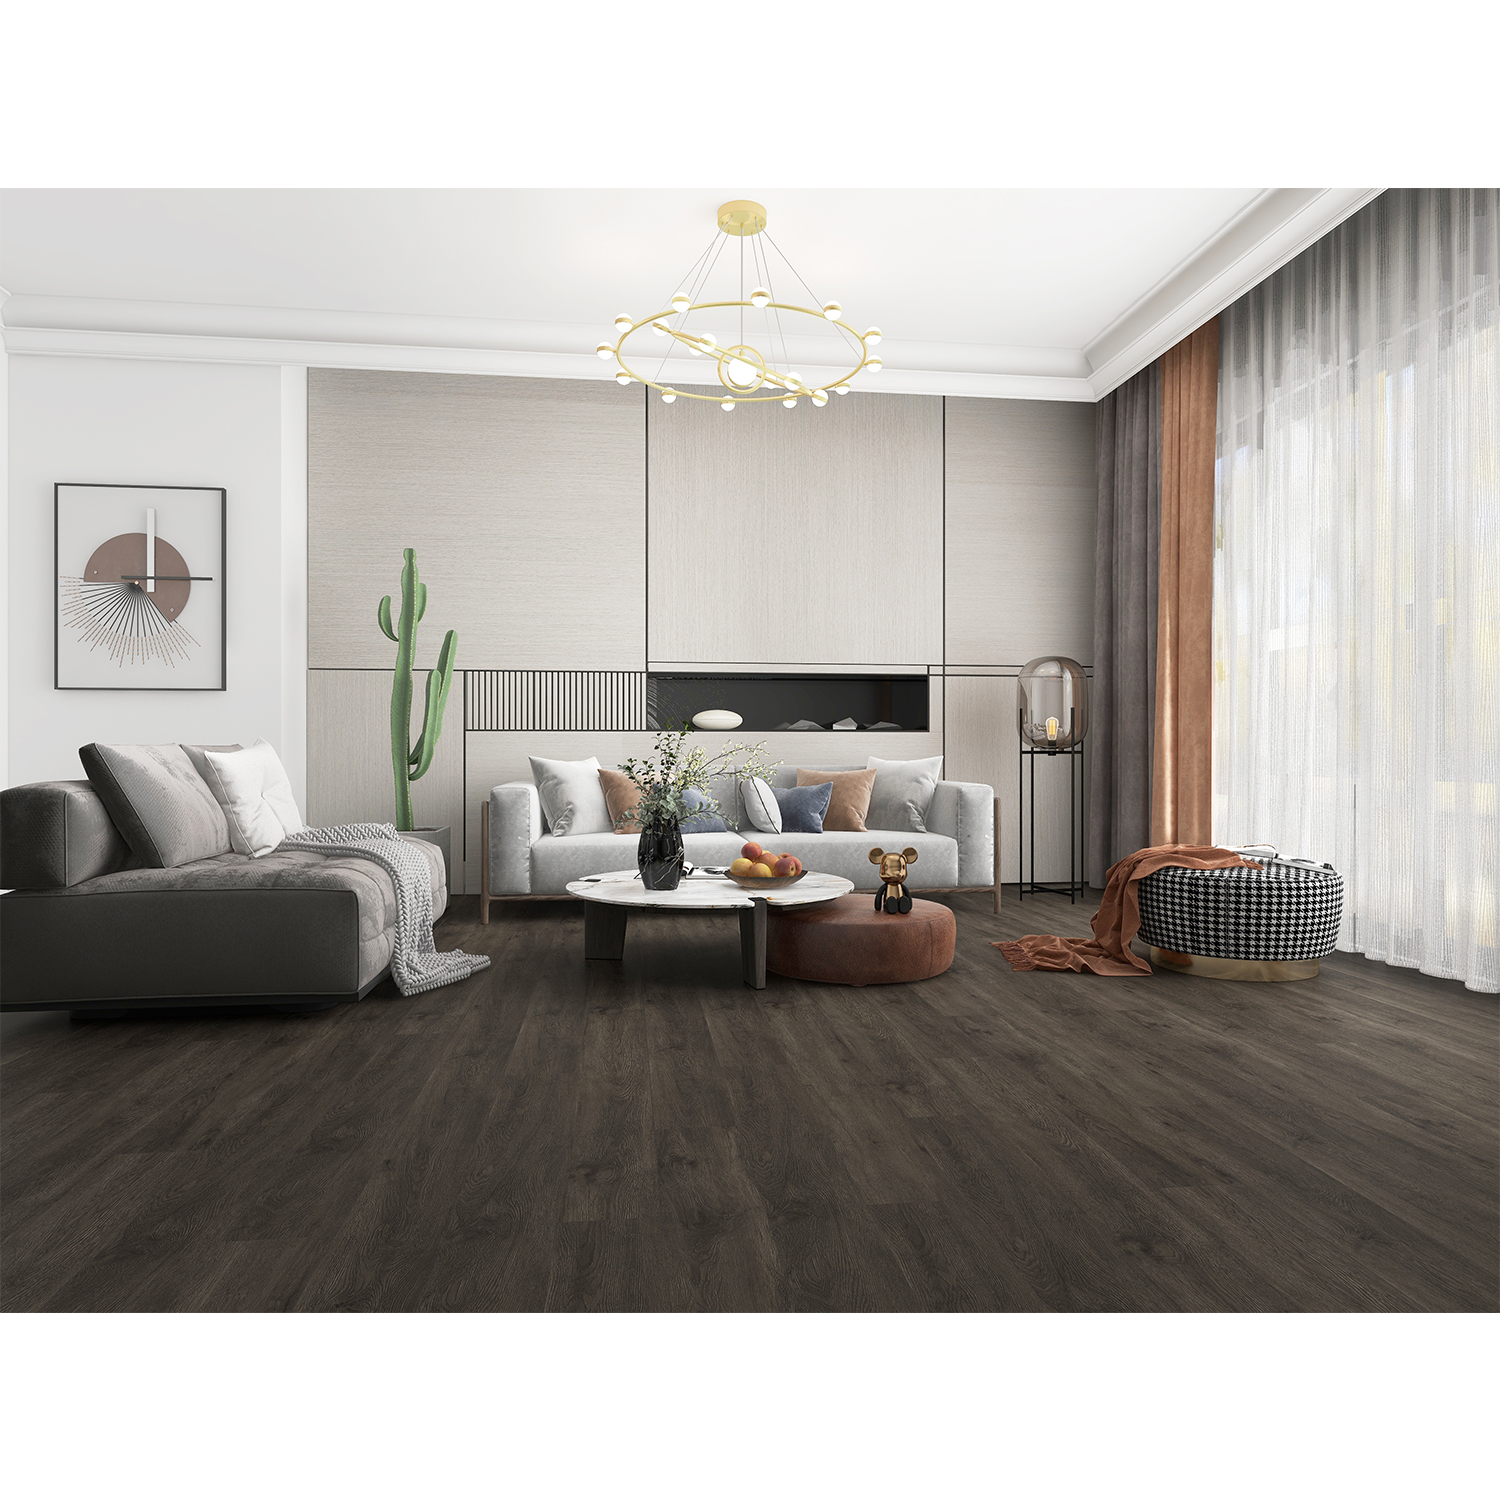 Floorest - 6MM (1.5MM Pad) - 1011 (NEW) - Penthouse Brown - 23.68 SF / Box Vinyl Click